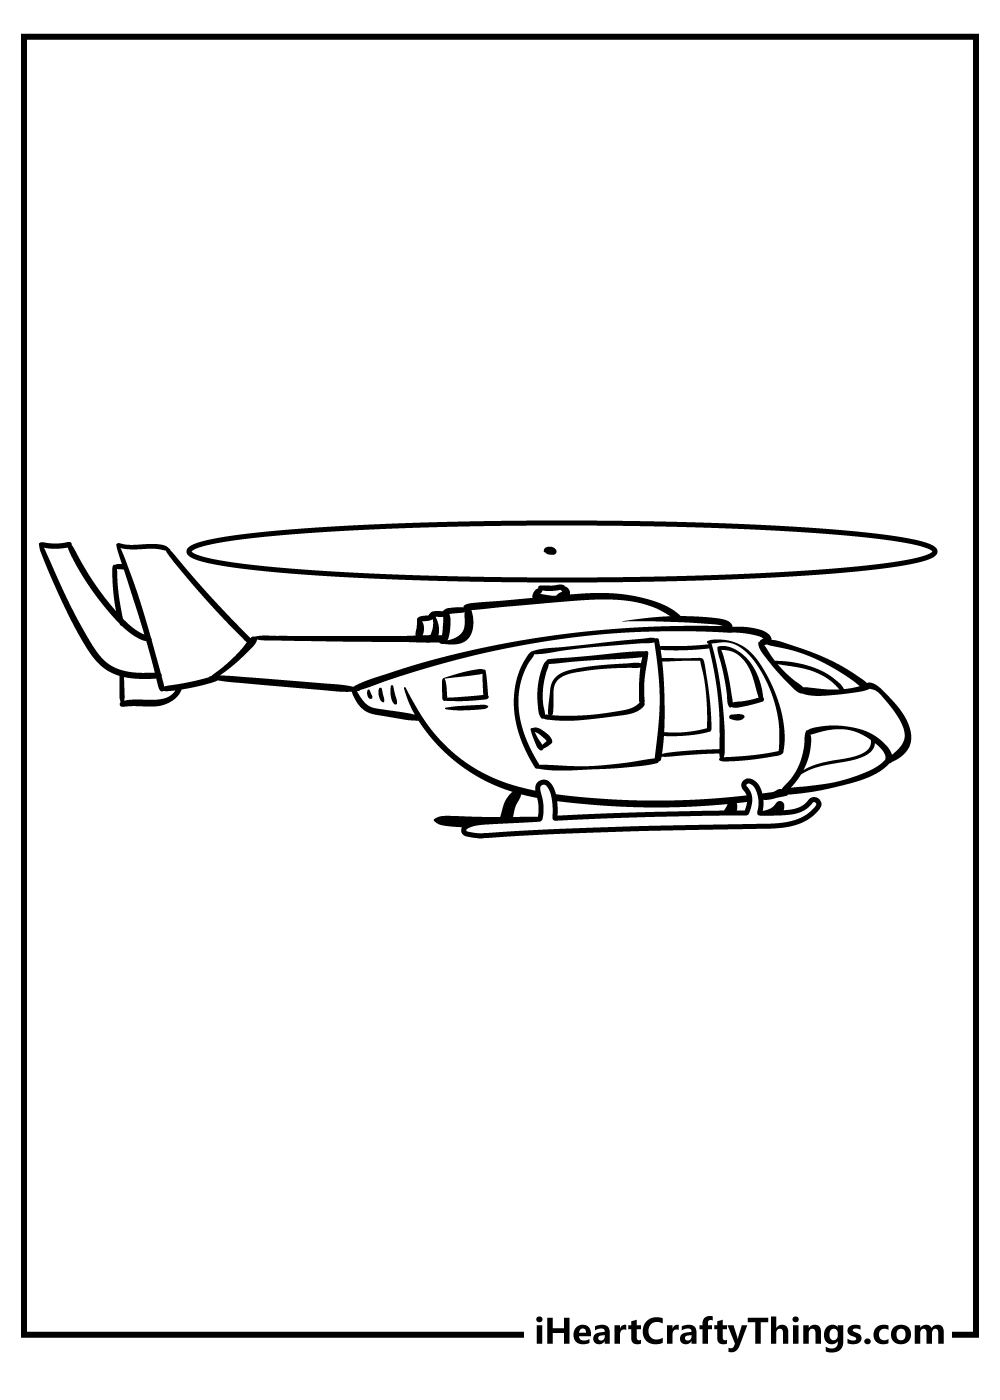 Helicopter Coloring Pages for adults free printable